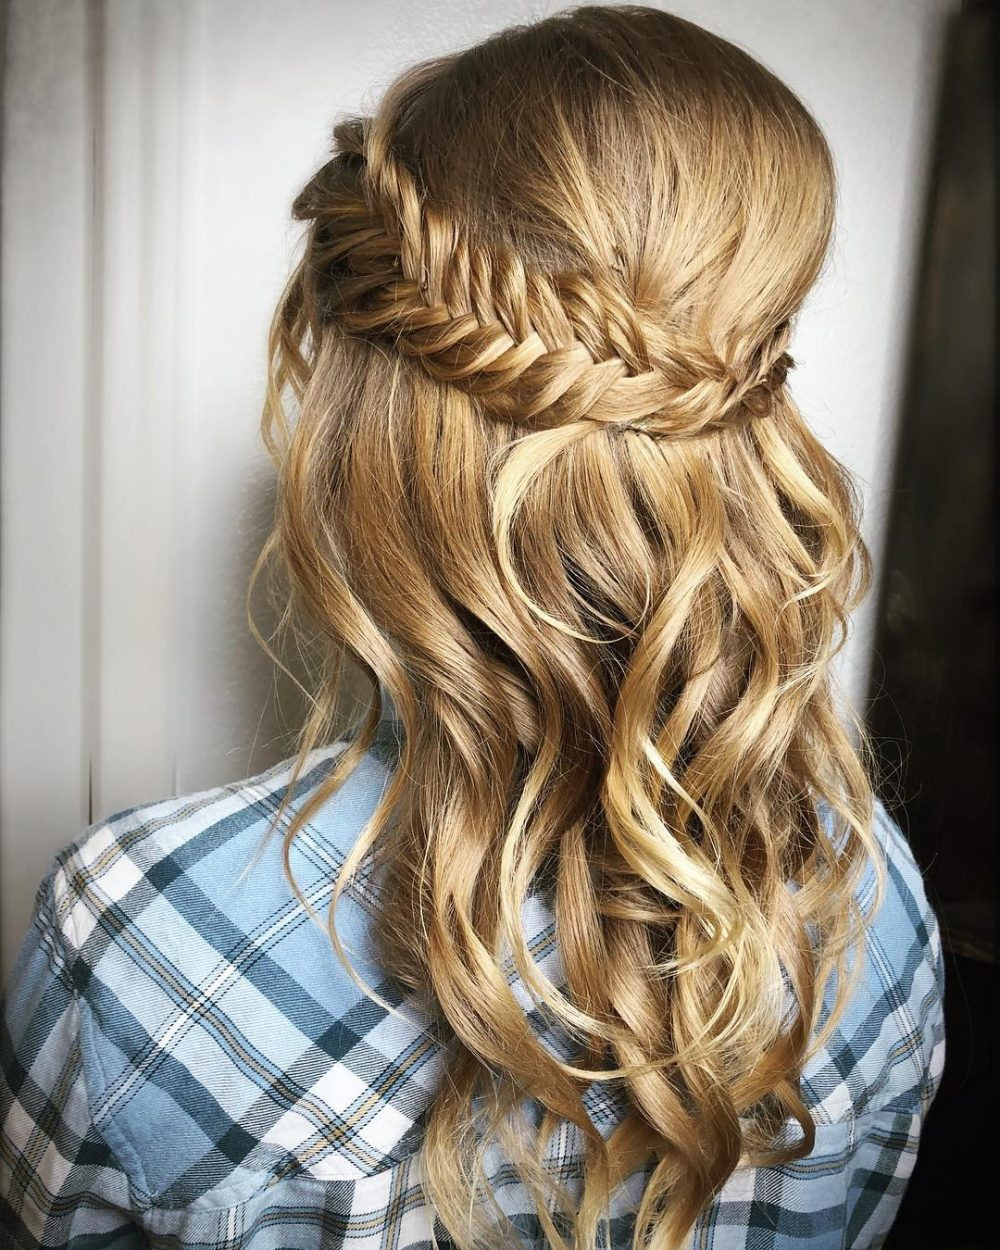 Prom Half Up Hairstyles
 Half Up Half Down Prom Hairstyles and How To s